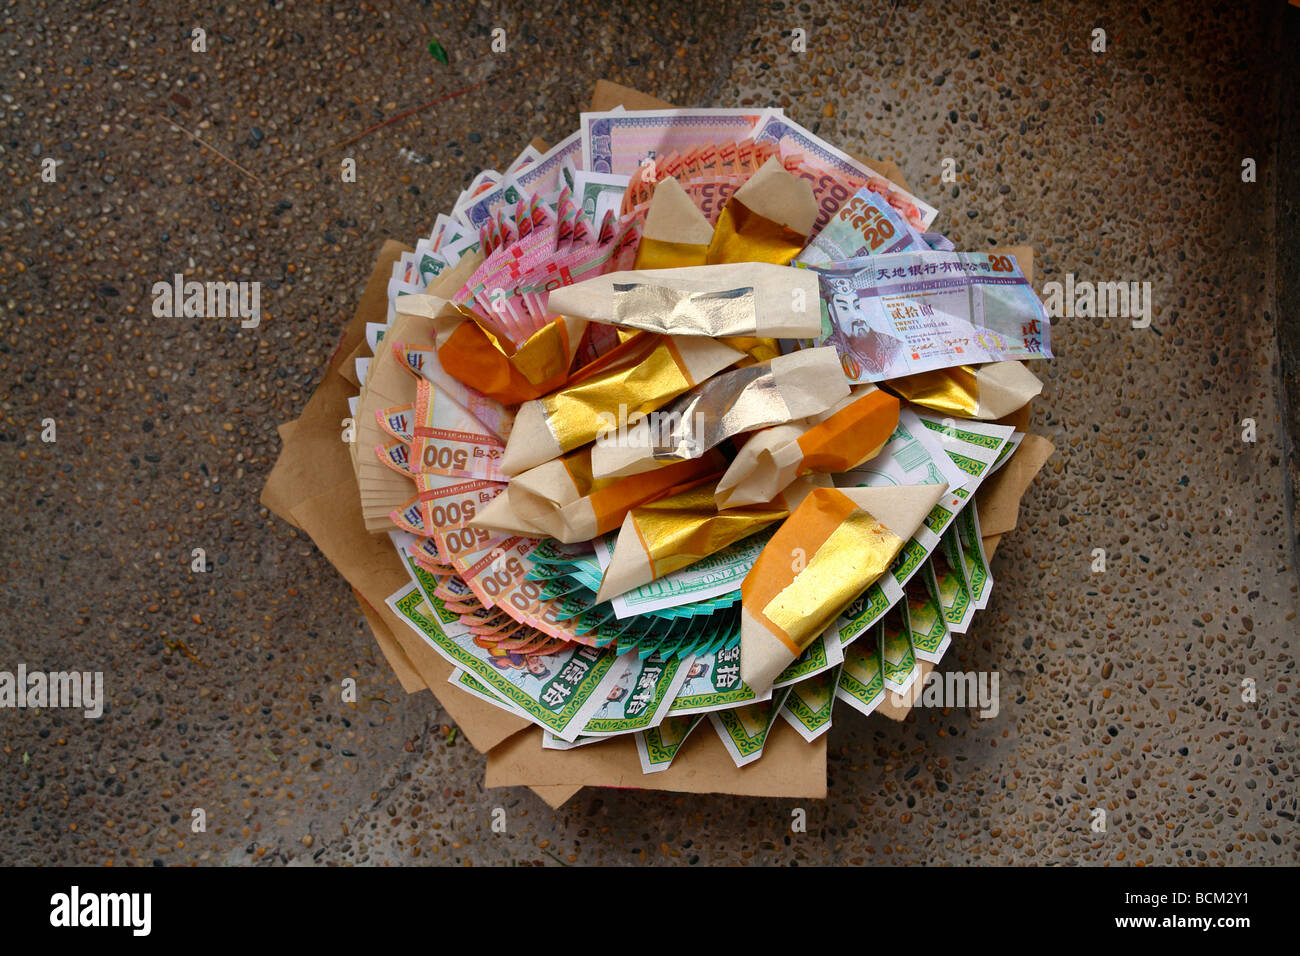 China Hong Kong chinese buddhist or taoist paper offering at temple Stock Photo